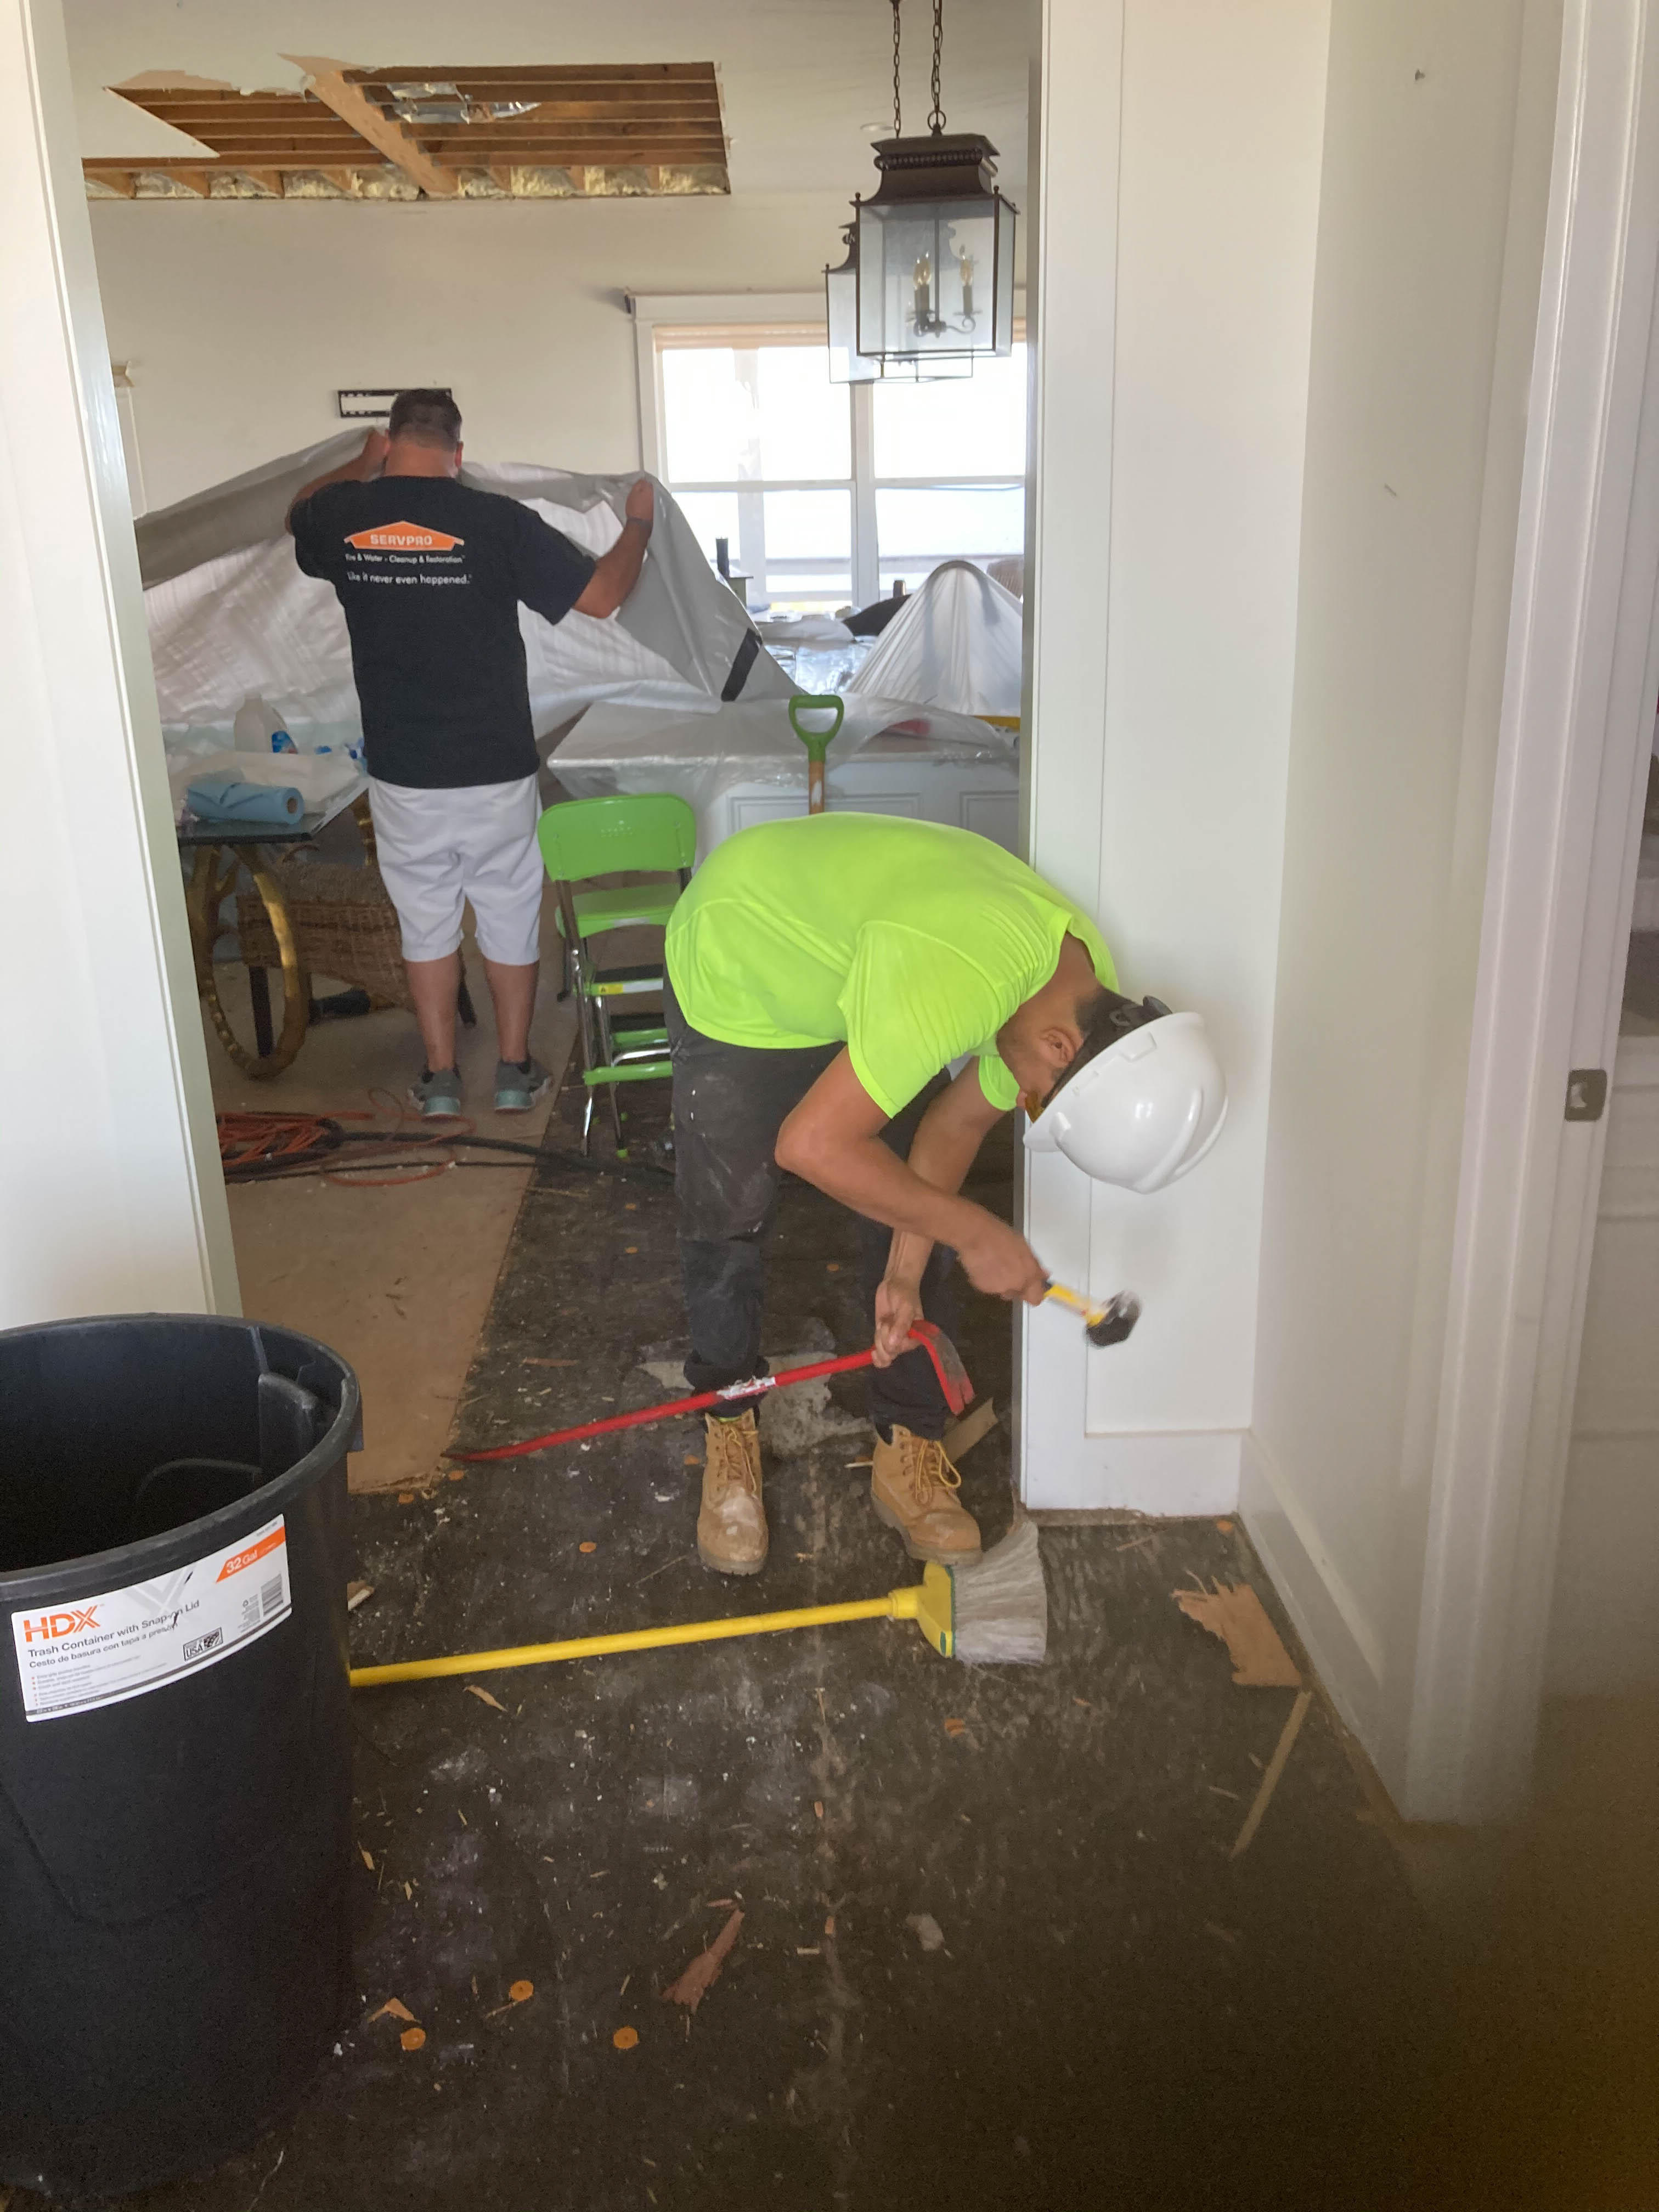 SERVPRO of South Garland teams are trained to help get your property back, "Like it never even happened."